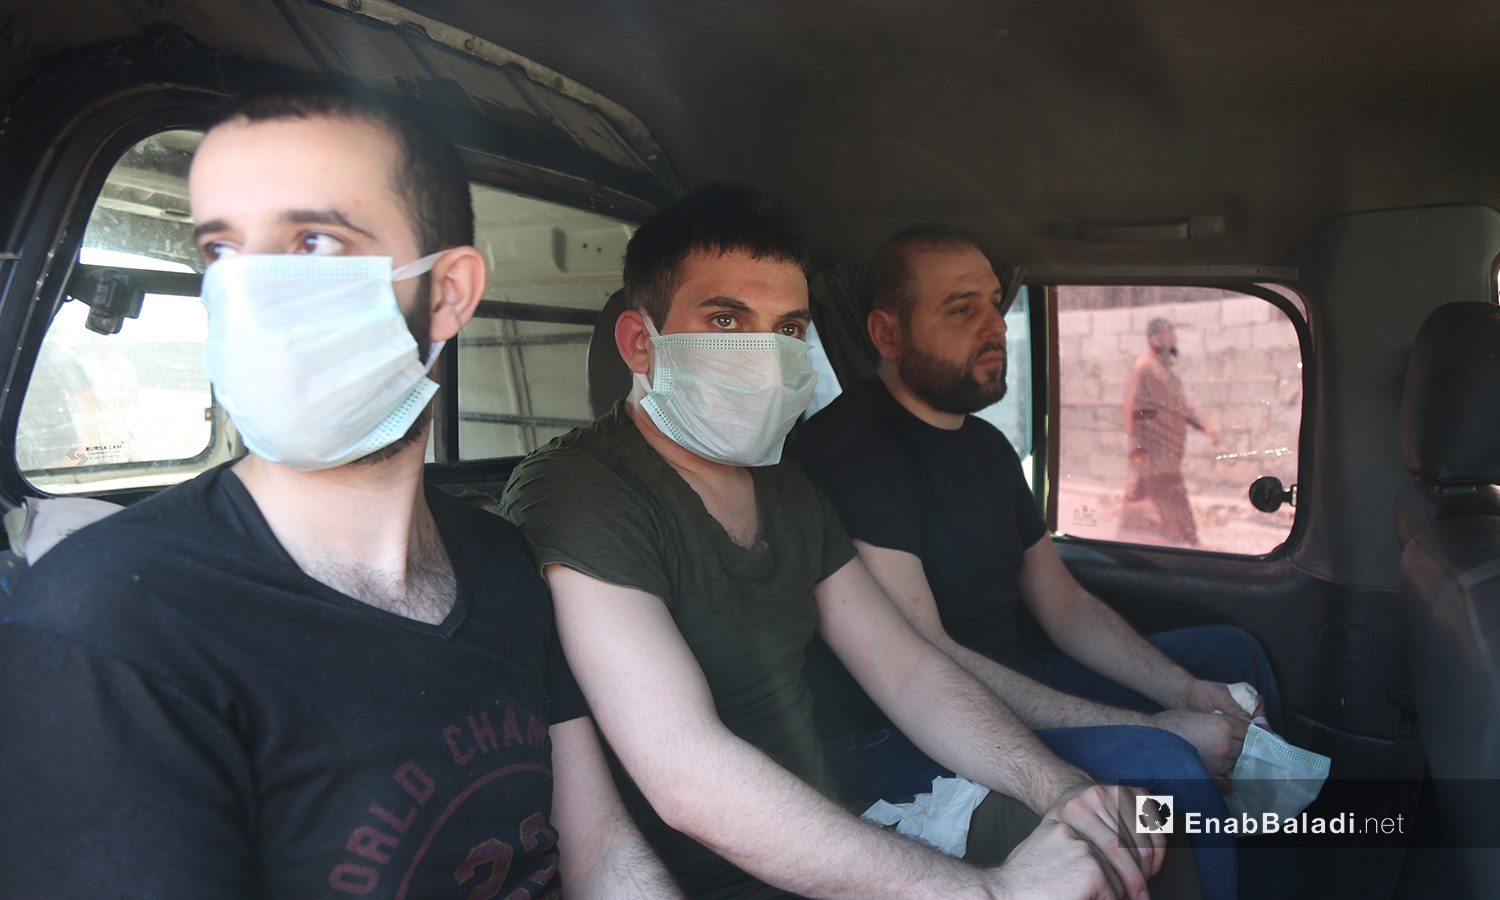 A prisoners’ exchange operation between the Hay’ at Tahrir al-Sham (HTS) and the Syrian regime – 12 August 2020 (Enab Baladi / Yousef Ghuraibi)